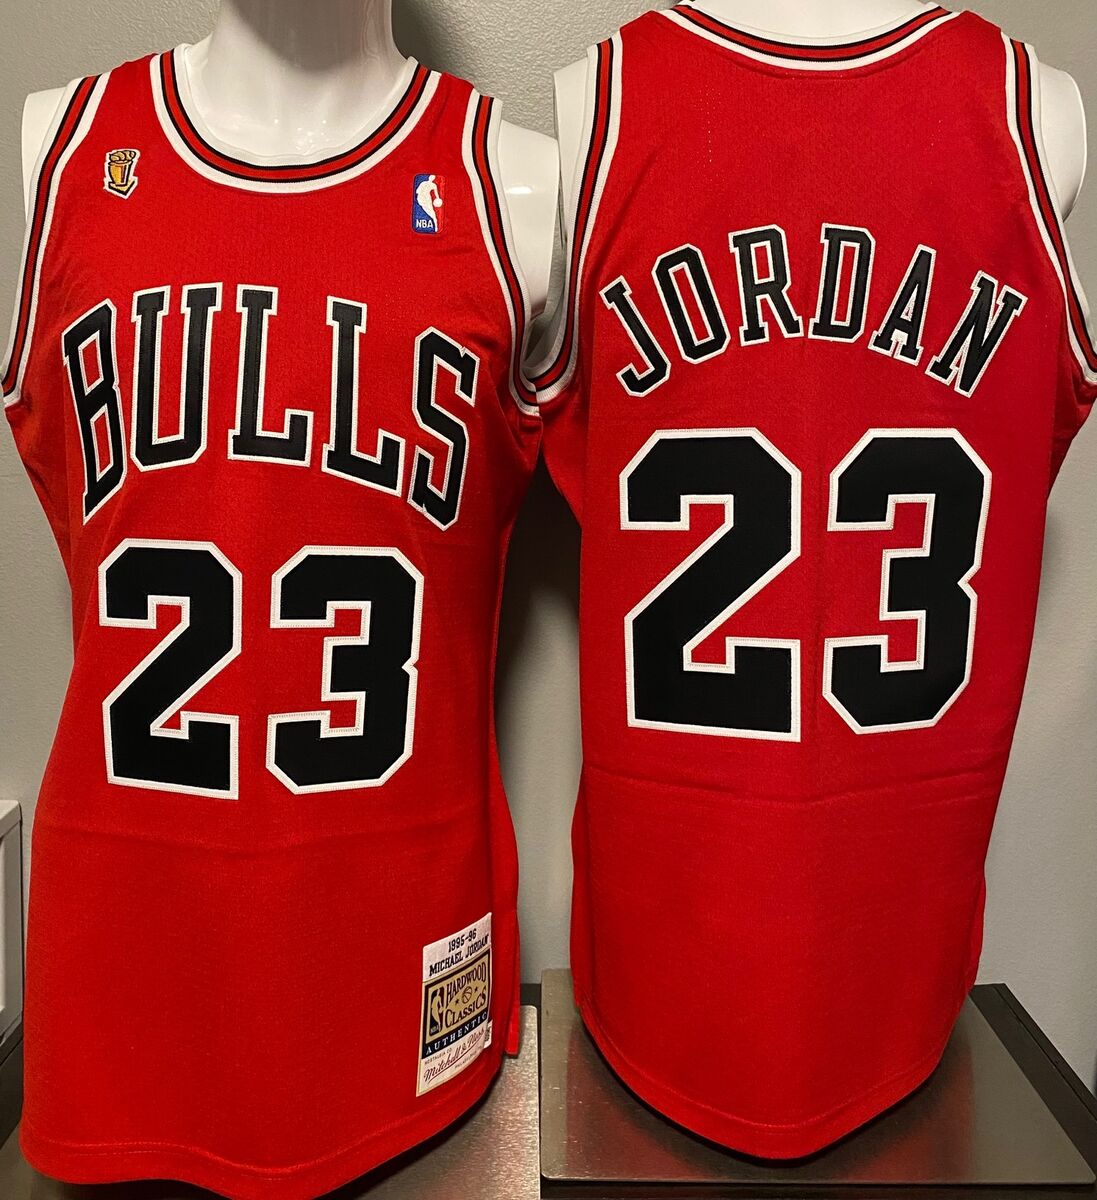 MITCHELL & NESS NBA AUTHENTIC JERSEY CHICAGO BULLS ROAD FINALS